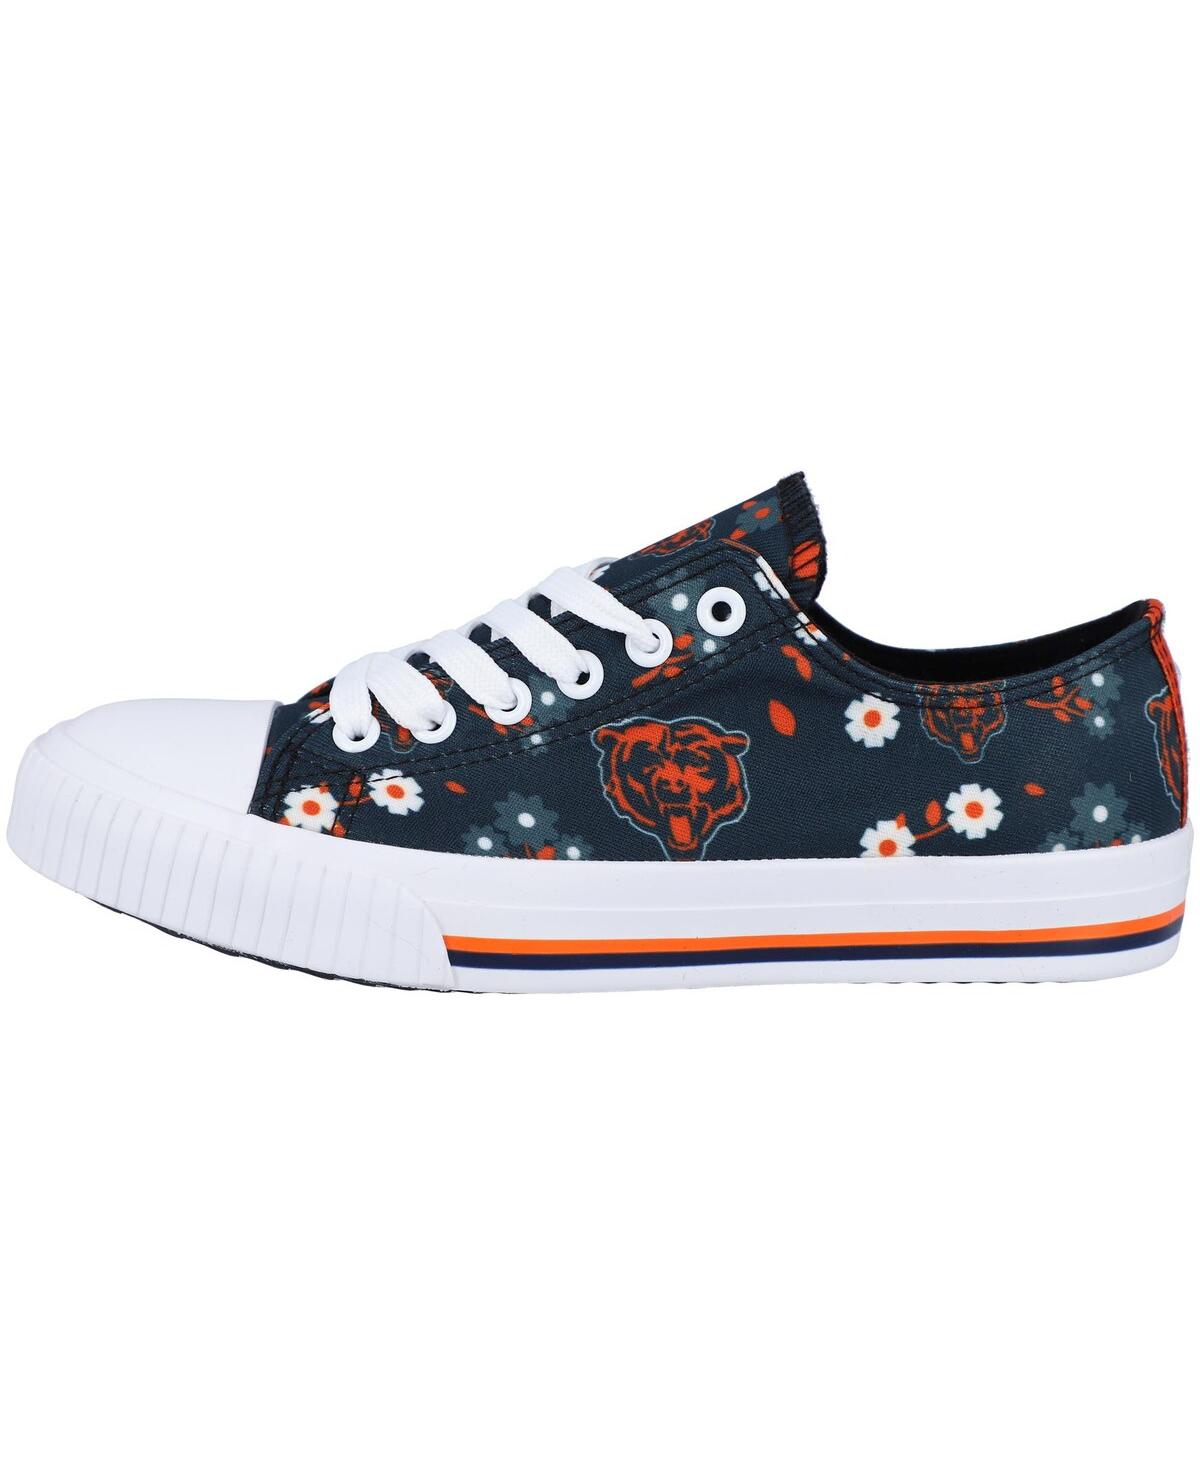 Women's Foco Navy Chicago Bears Flower Canvas Allover Shoes - Navy